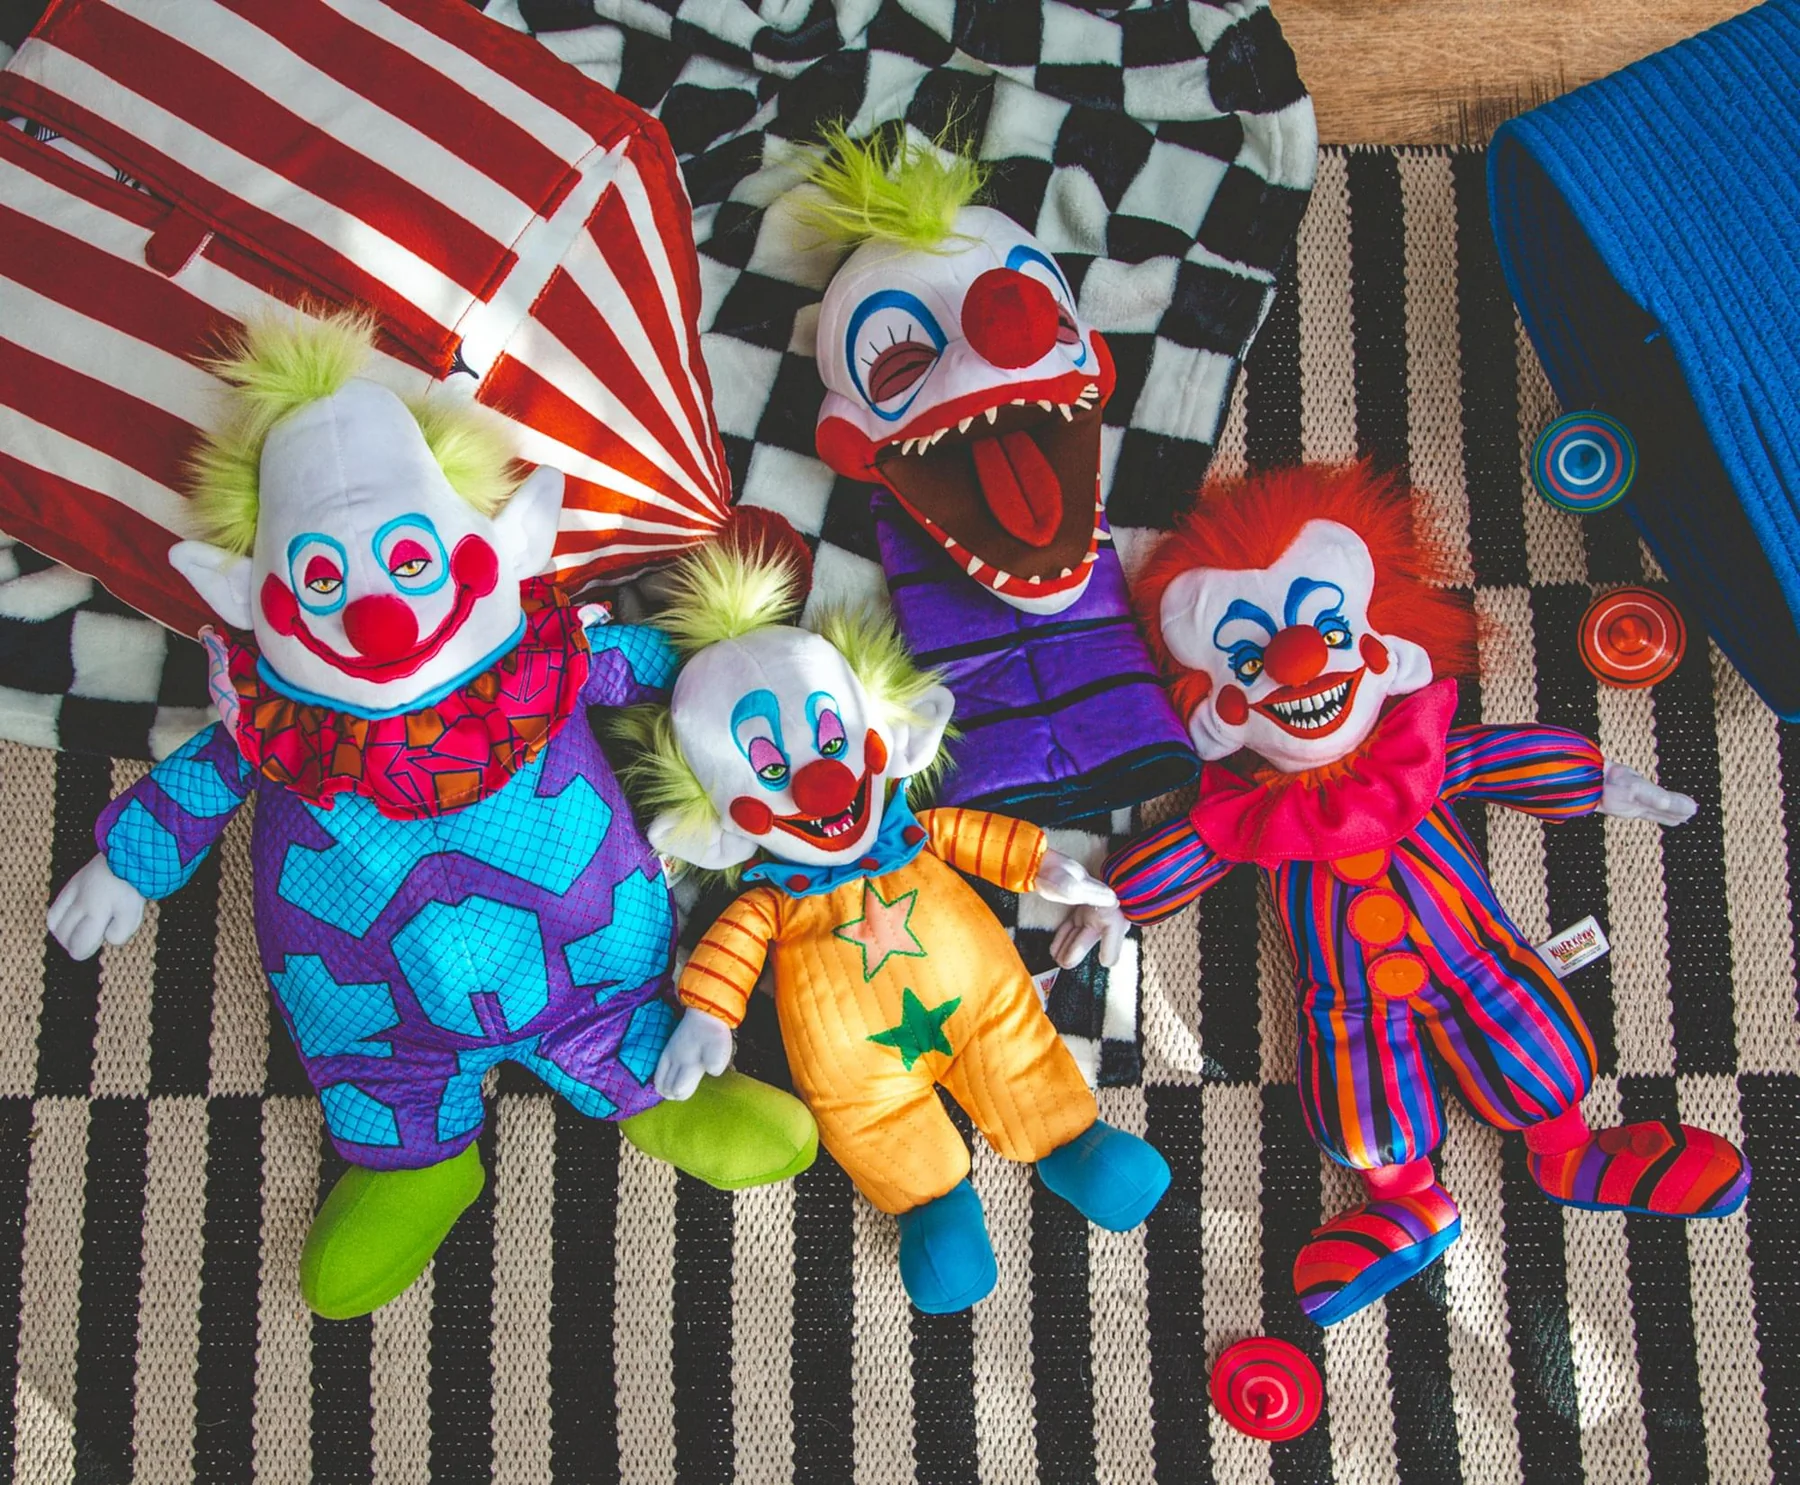 ‘Killer Klowns from Outer Space’ Plush Collection Haunts Toynk’s Shop